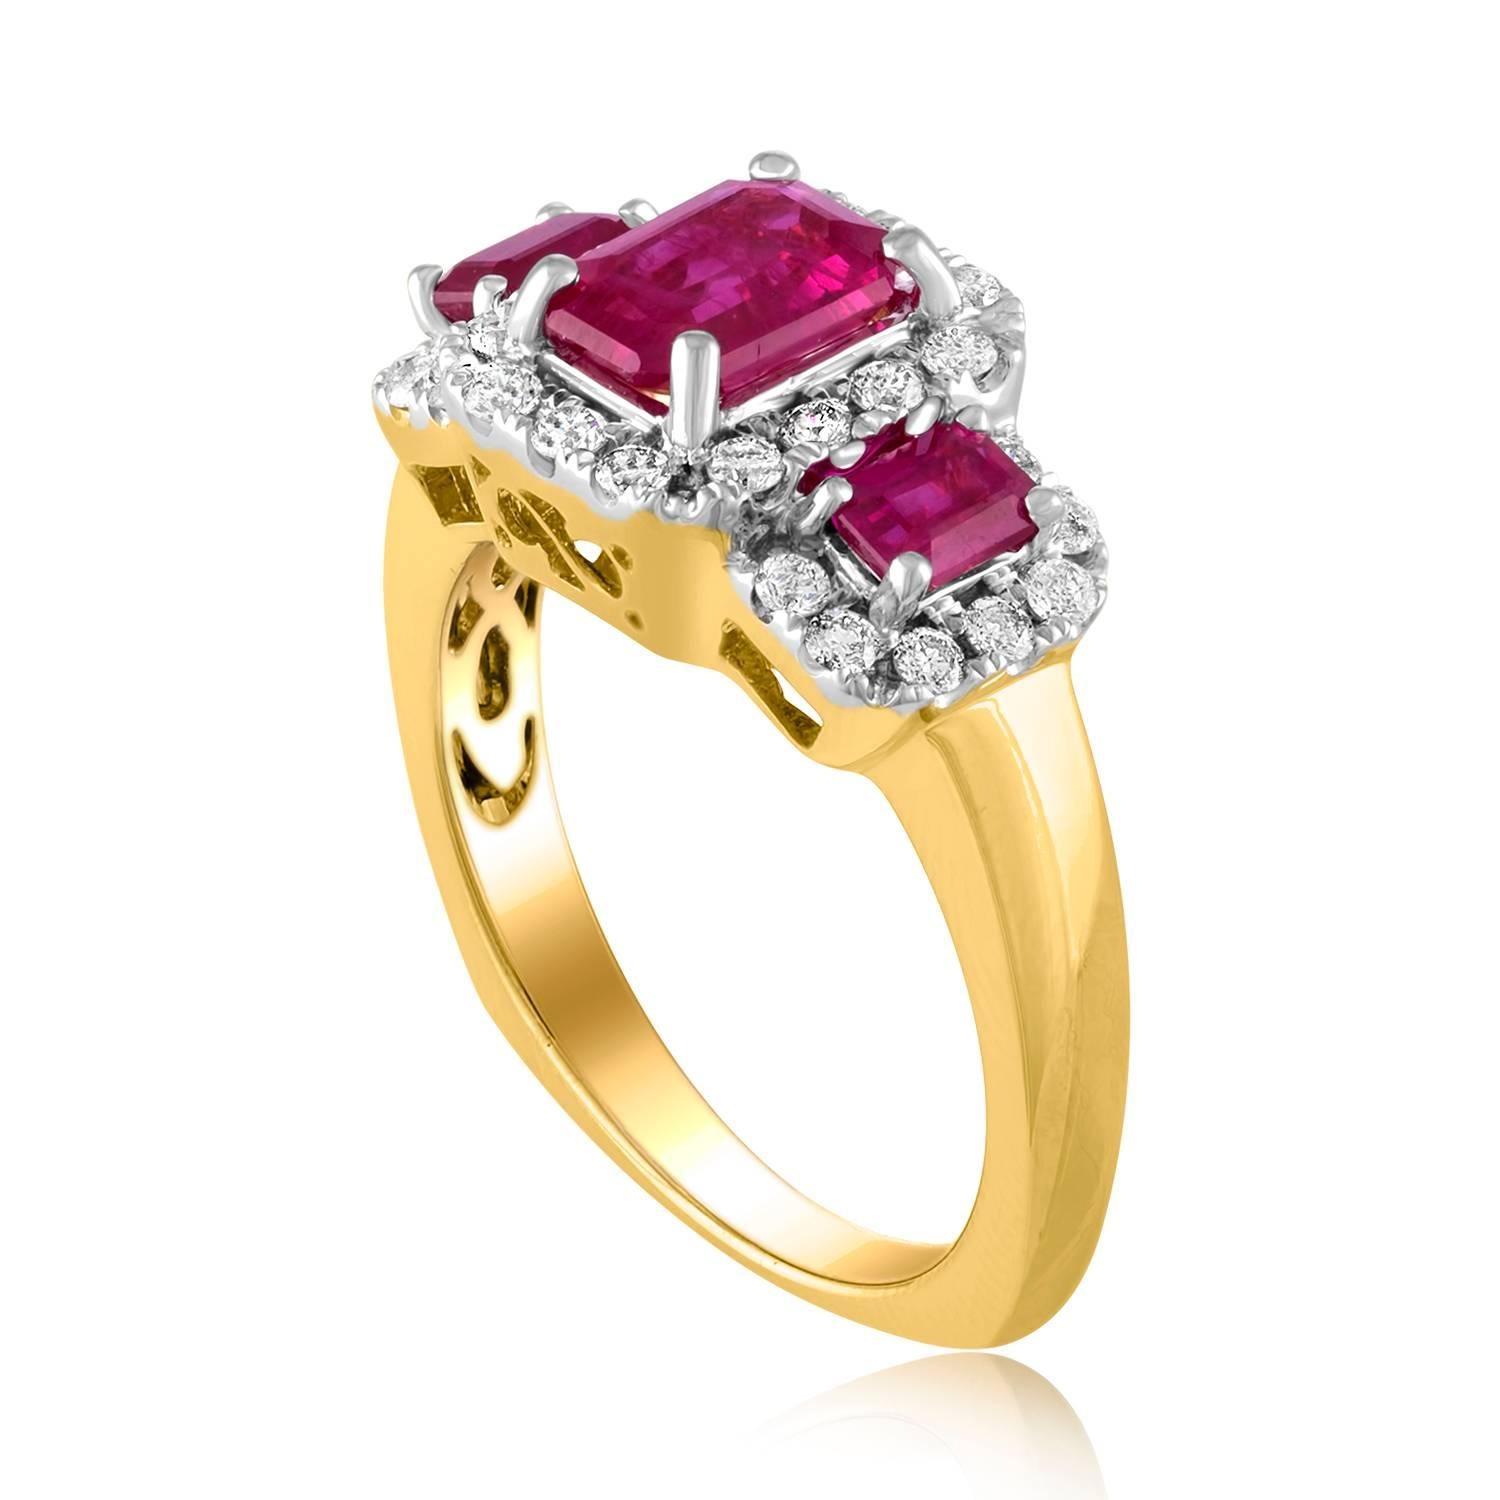 Classic 3 Stone Ring
The ring is 14K White & Yellow Gold.
The center Ruby is 1.15 Carats with a 0.30 Carts Each Side Ruby Stone.
The 3 Rubies total 1.75 Carats Heated Burma Rubies.
The 3 Rubies are step cut or emerald cut.
The Center Ruby is a step